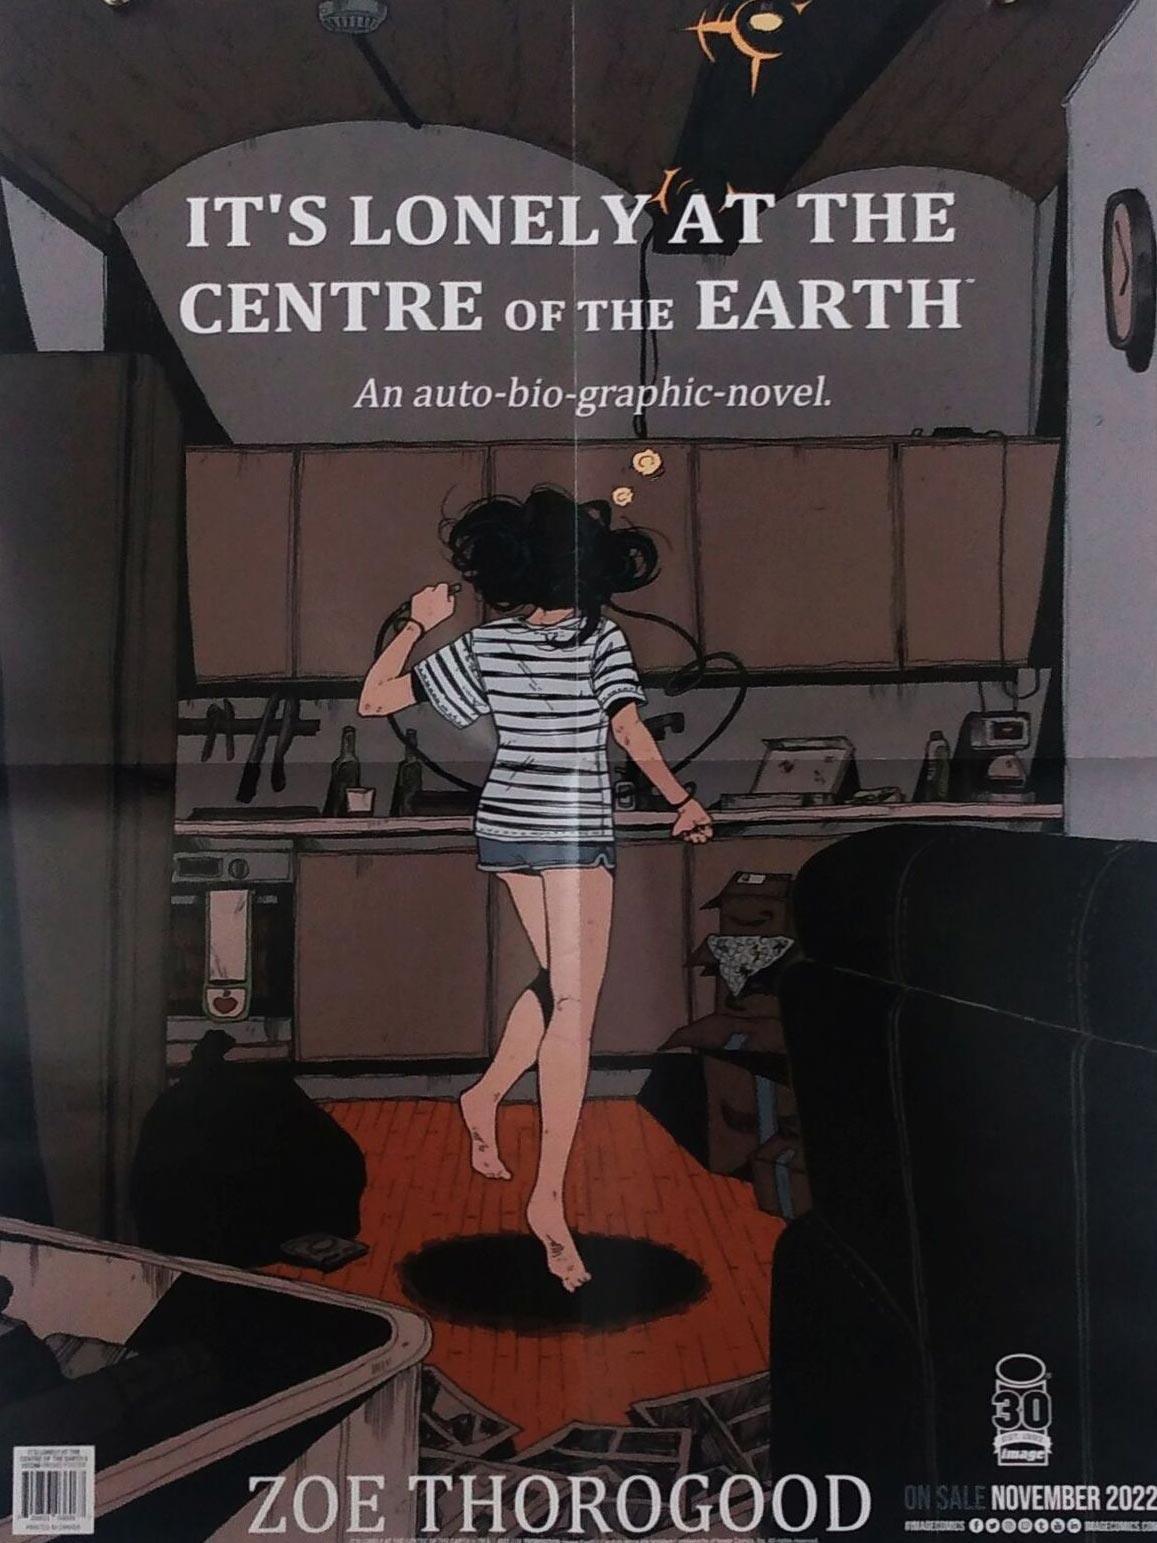 ITS LONELY AT THE CENTRE OF THE EARTH/HITOMI DOUBLE SIDED FOLDED PROMO POSTER - Kings Comics